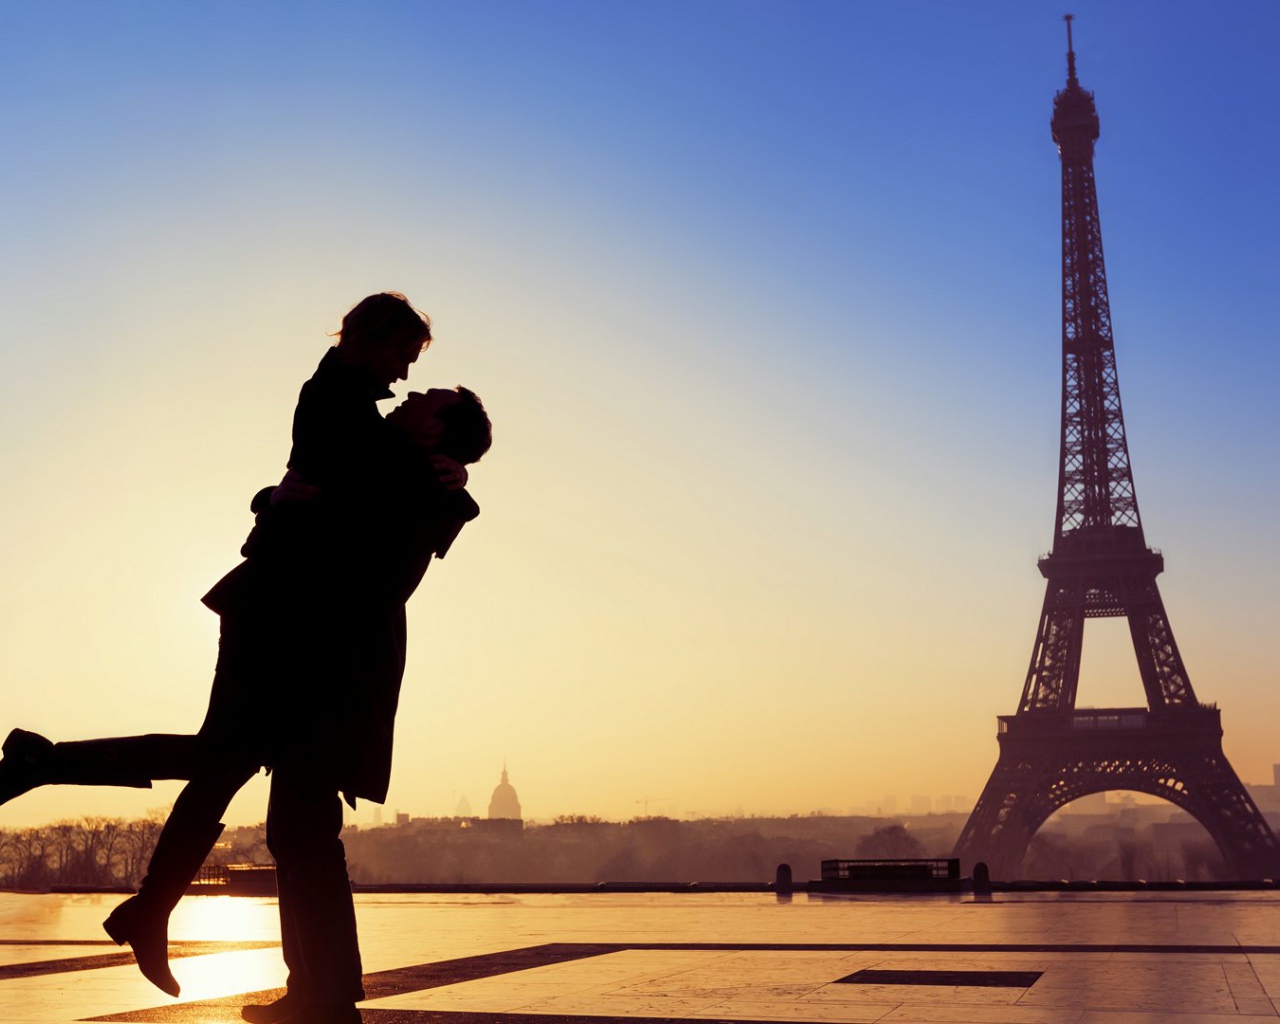 A couple in love in Paris